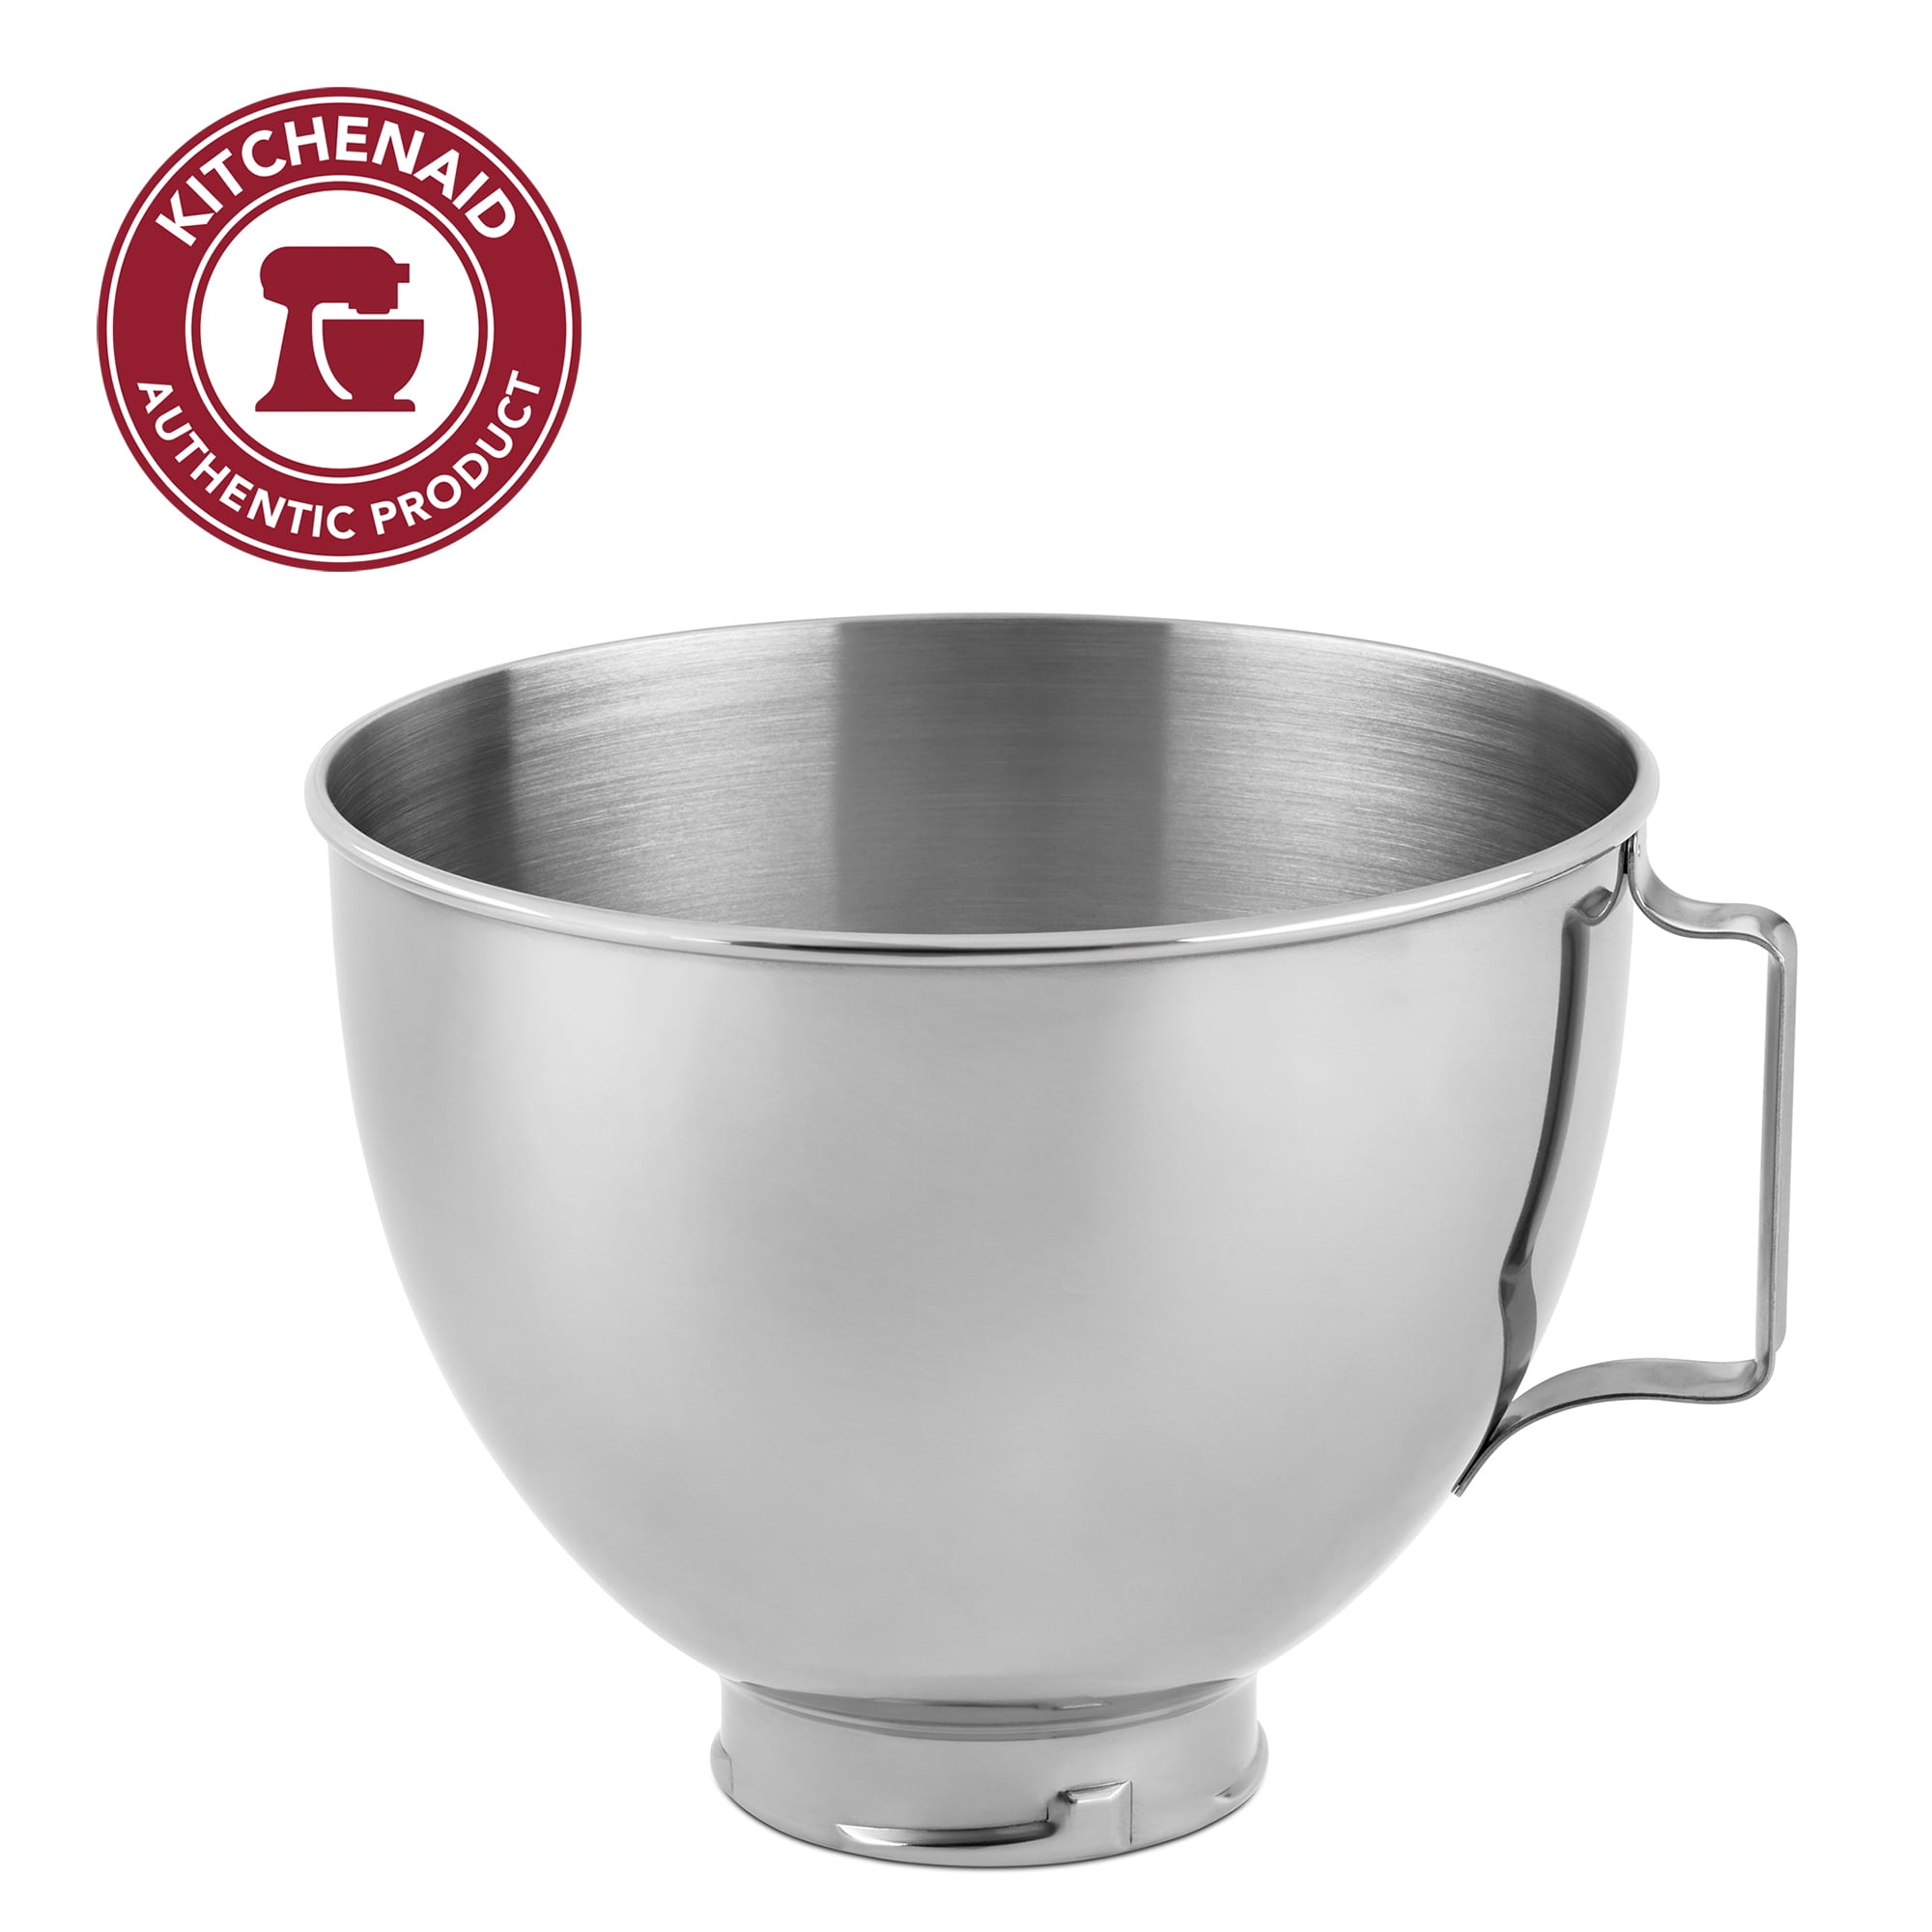 LETOMS Stand Mixer Bowl for Kitchenaid 4.5 Quart, Stainless Steel